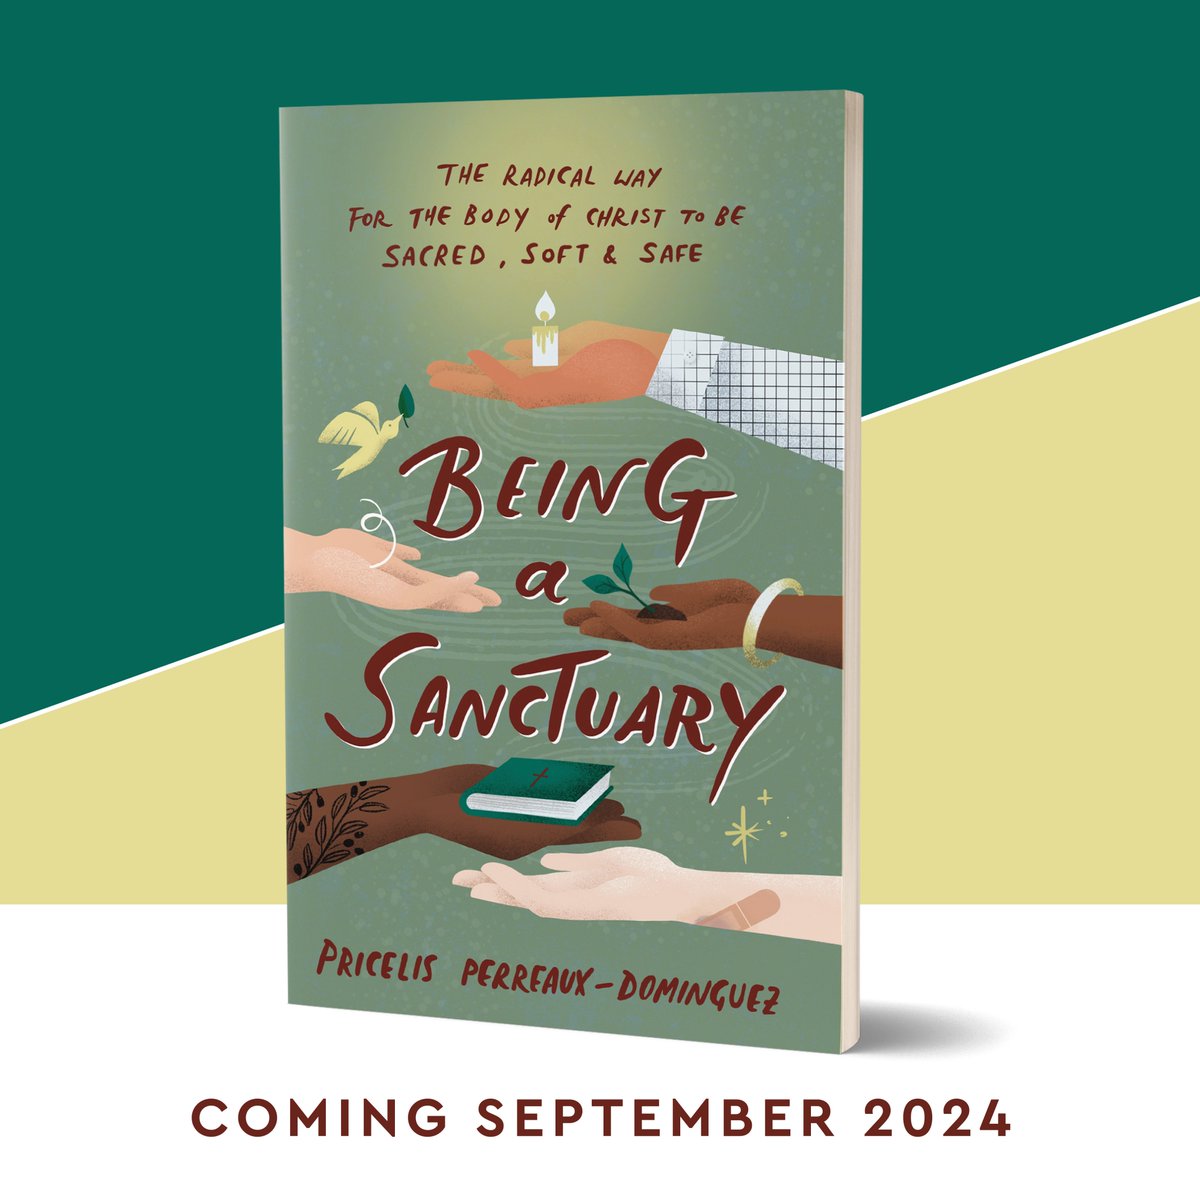 🌟Cover Reveal!🌟 We are so excited to share the cover and book announcement for Being a Sanctuary: The Radical Way for the Body of Christ to Be Sacred, Soft, and Safe by Pricelis Perreaux-Dominguez! You can preorder now for 40% off: bakerbookhouse.com/products/579886